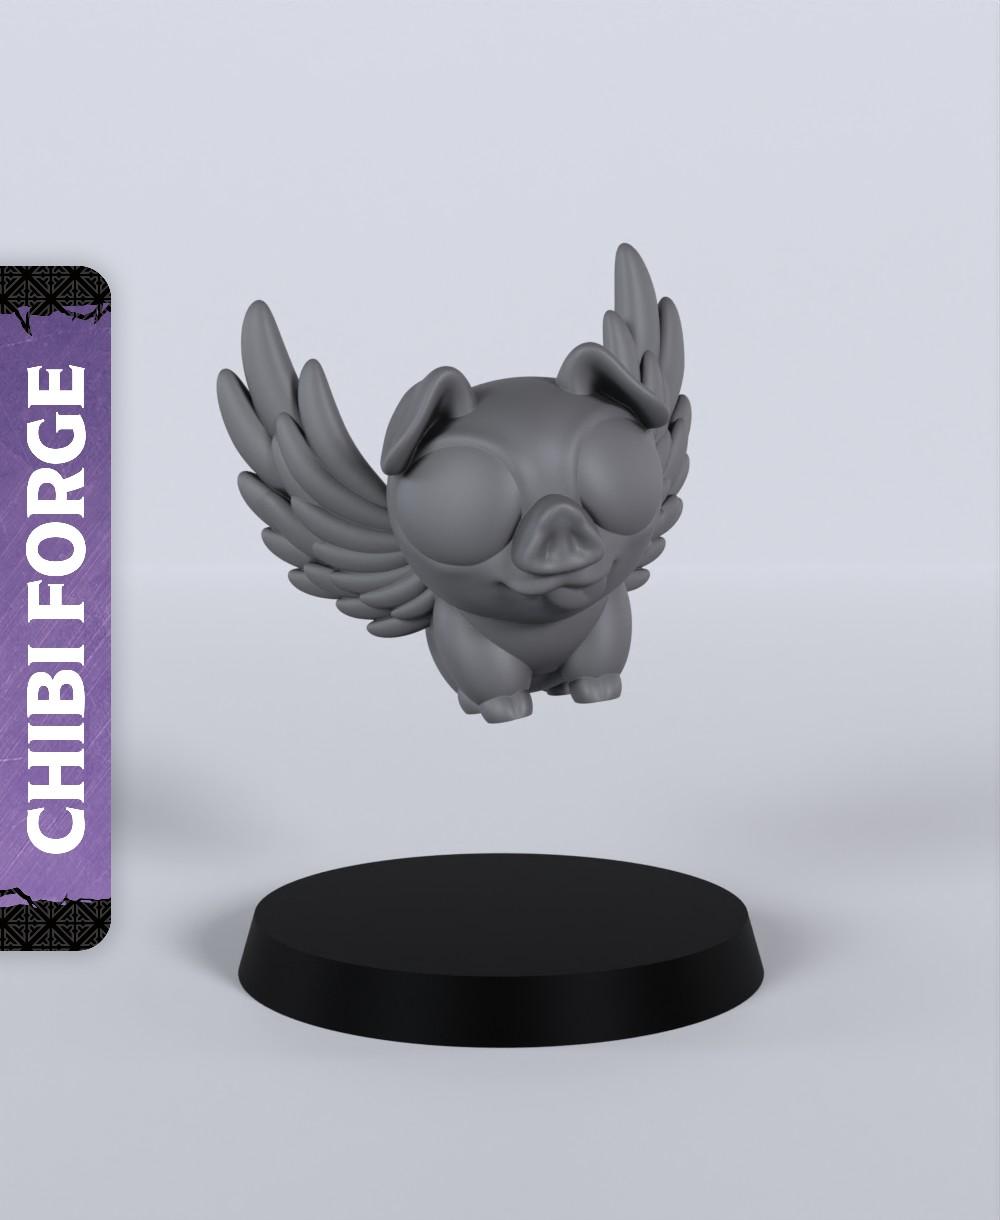 Winged Piglet - With Free Dragon Warhammer - 5e DnD Inspired for RPG and Wargamers 3d model